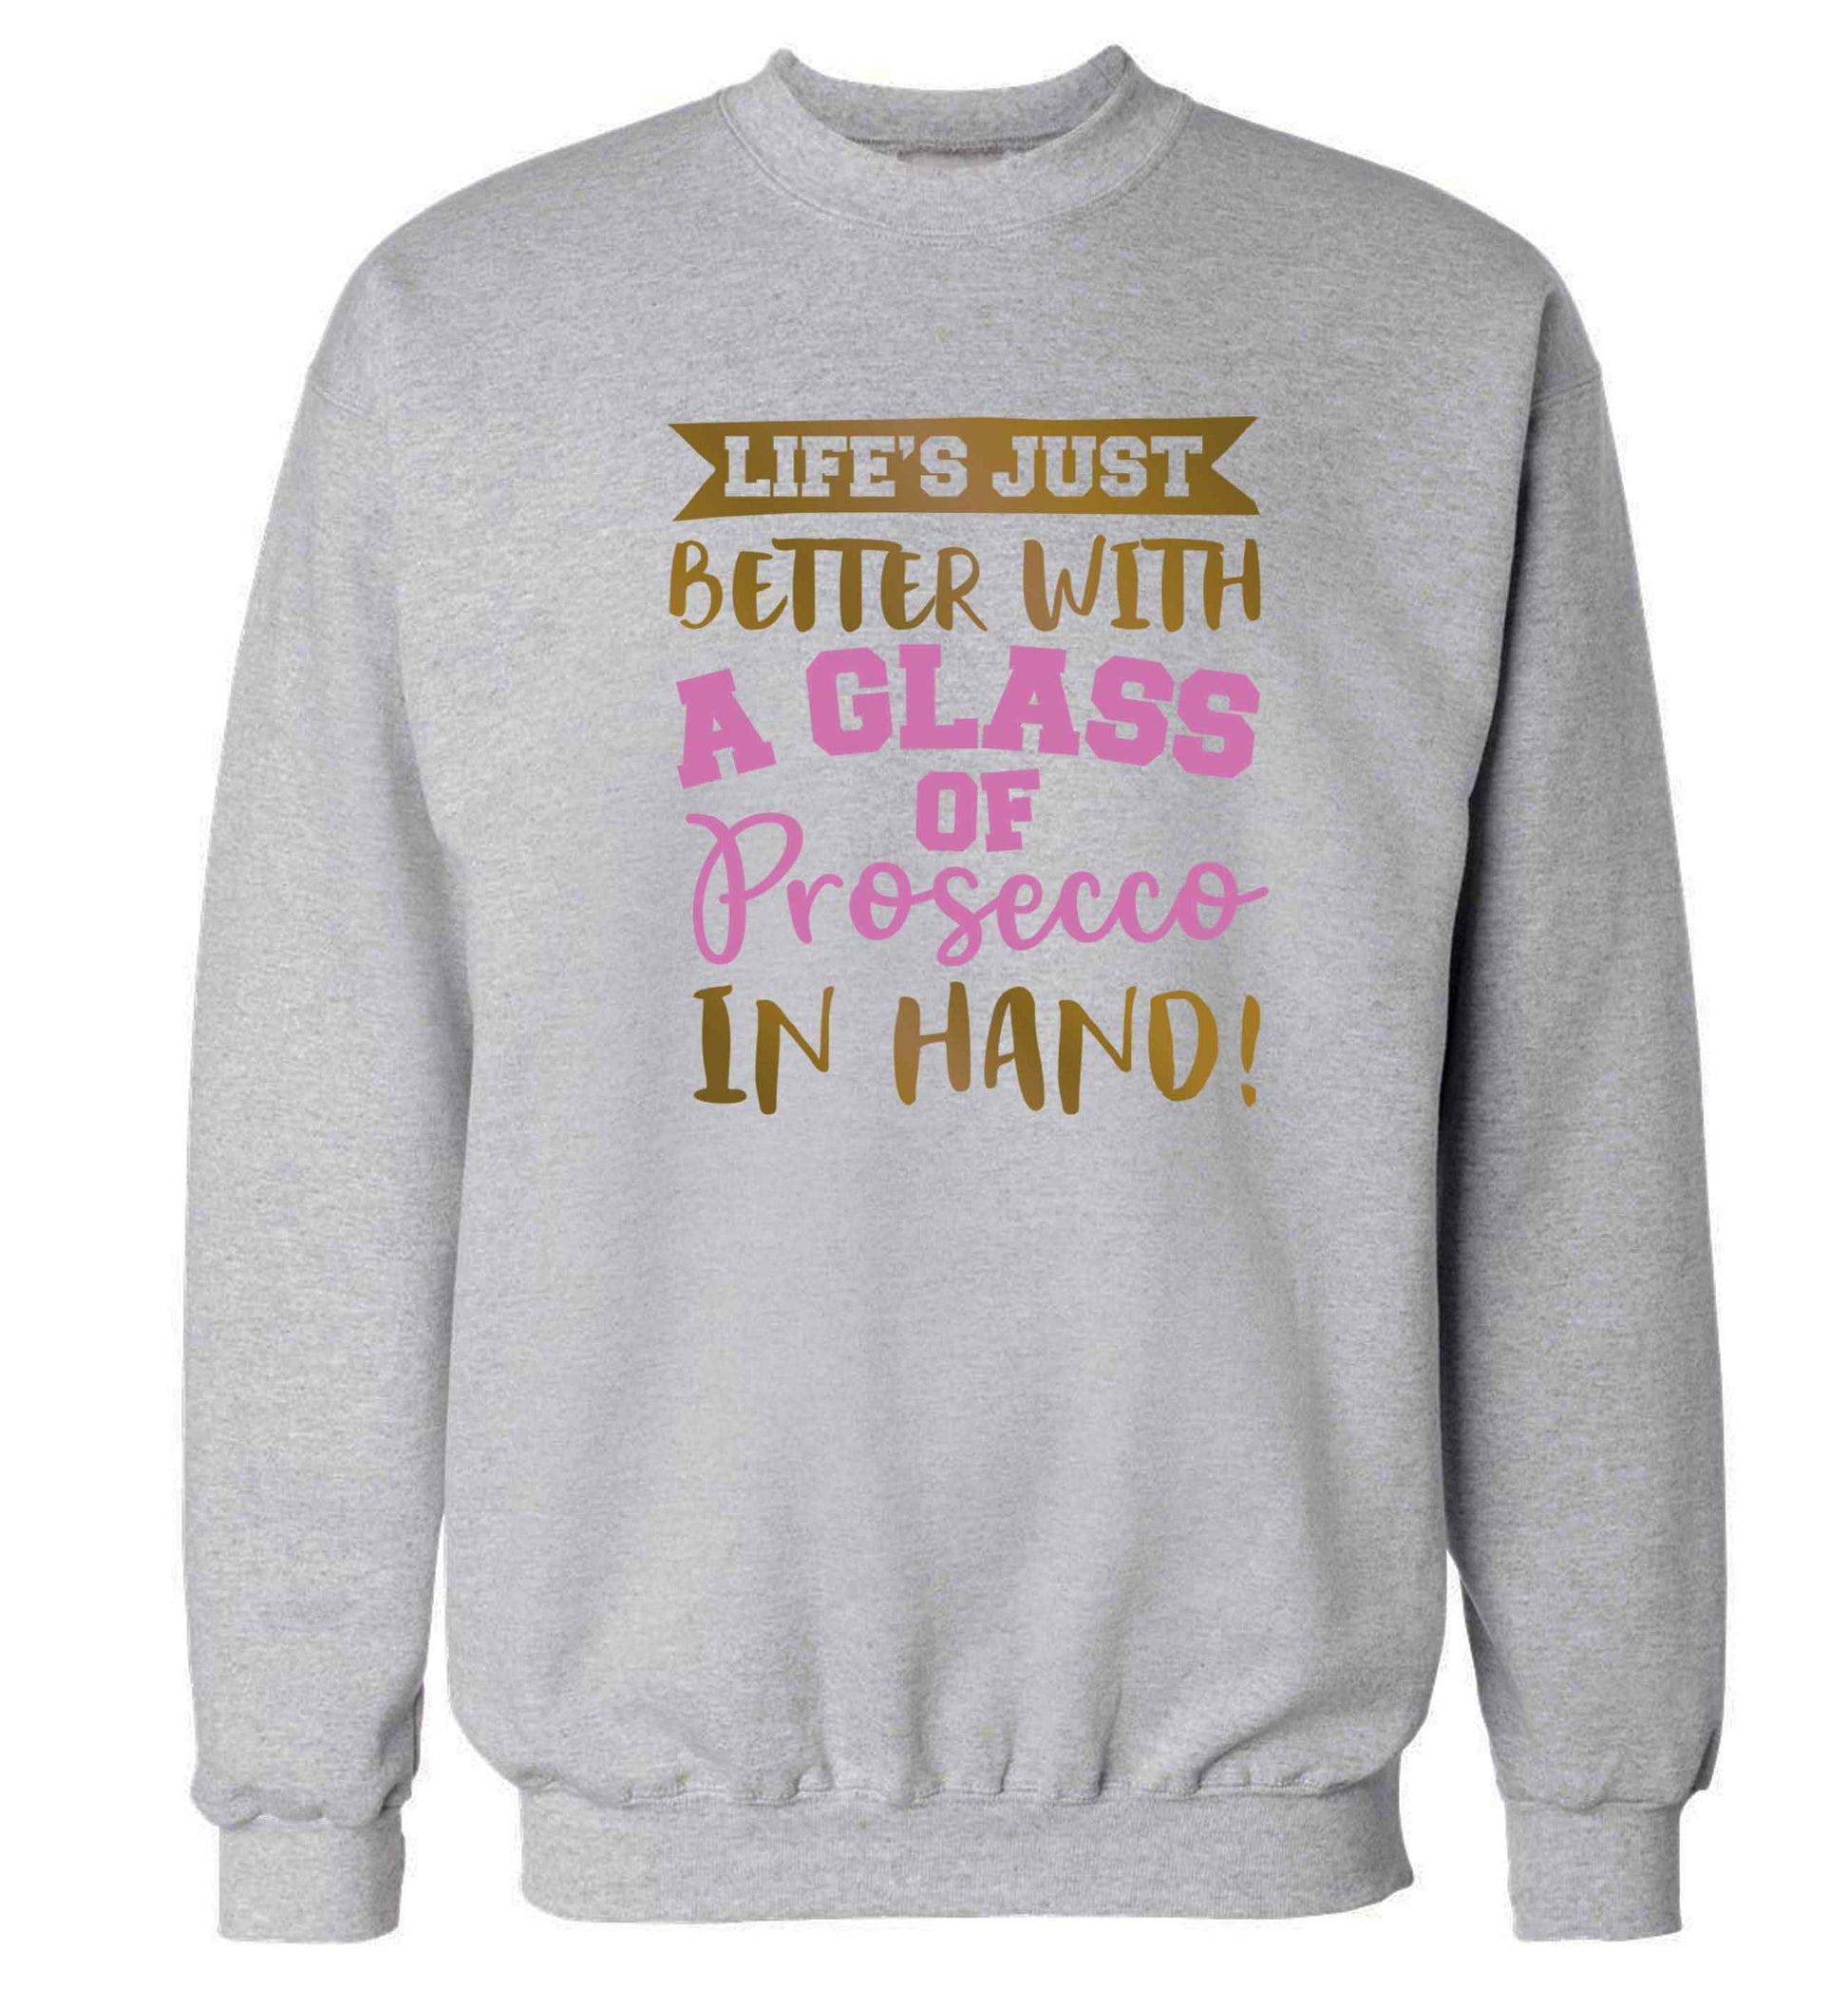 Life's just better with a glass of prosecco in hand Adult's unisex grey Sweater 2XL